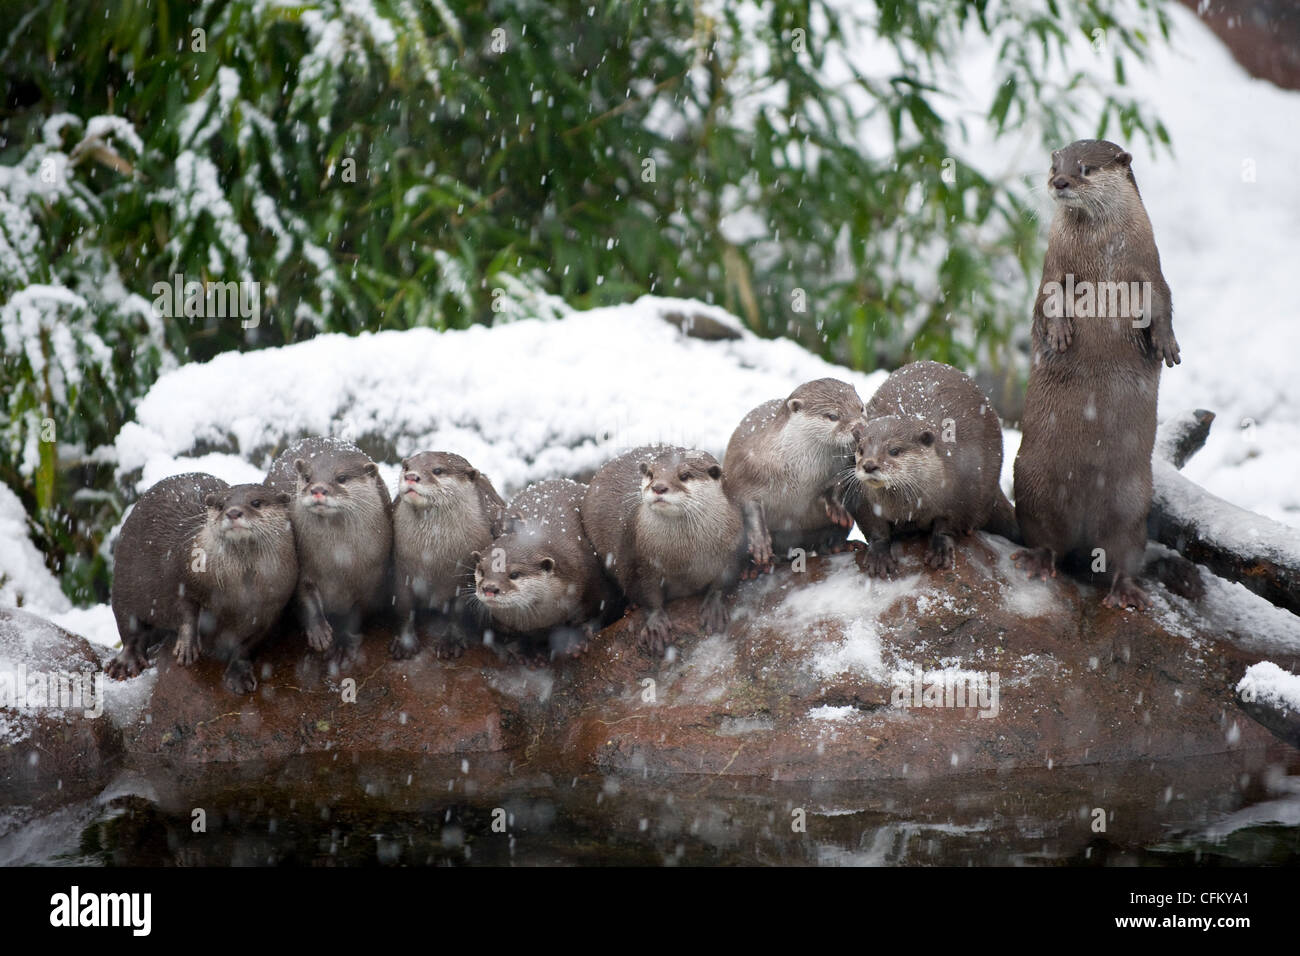 A group of Oriental Small-Clawed Otter on a rock in the snow (Amblonyx cinereus) Stock Photo